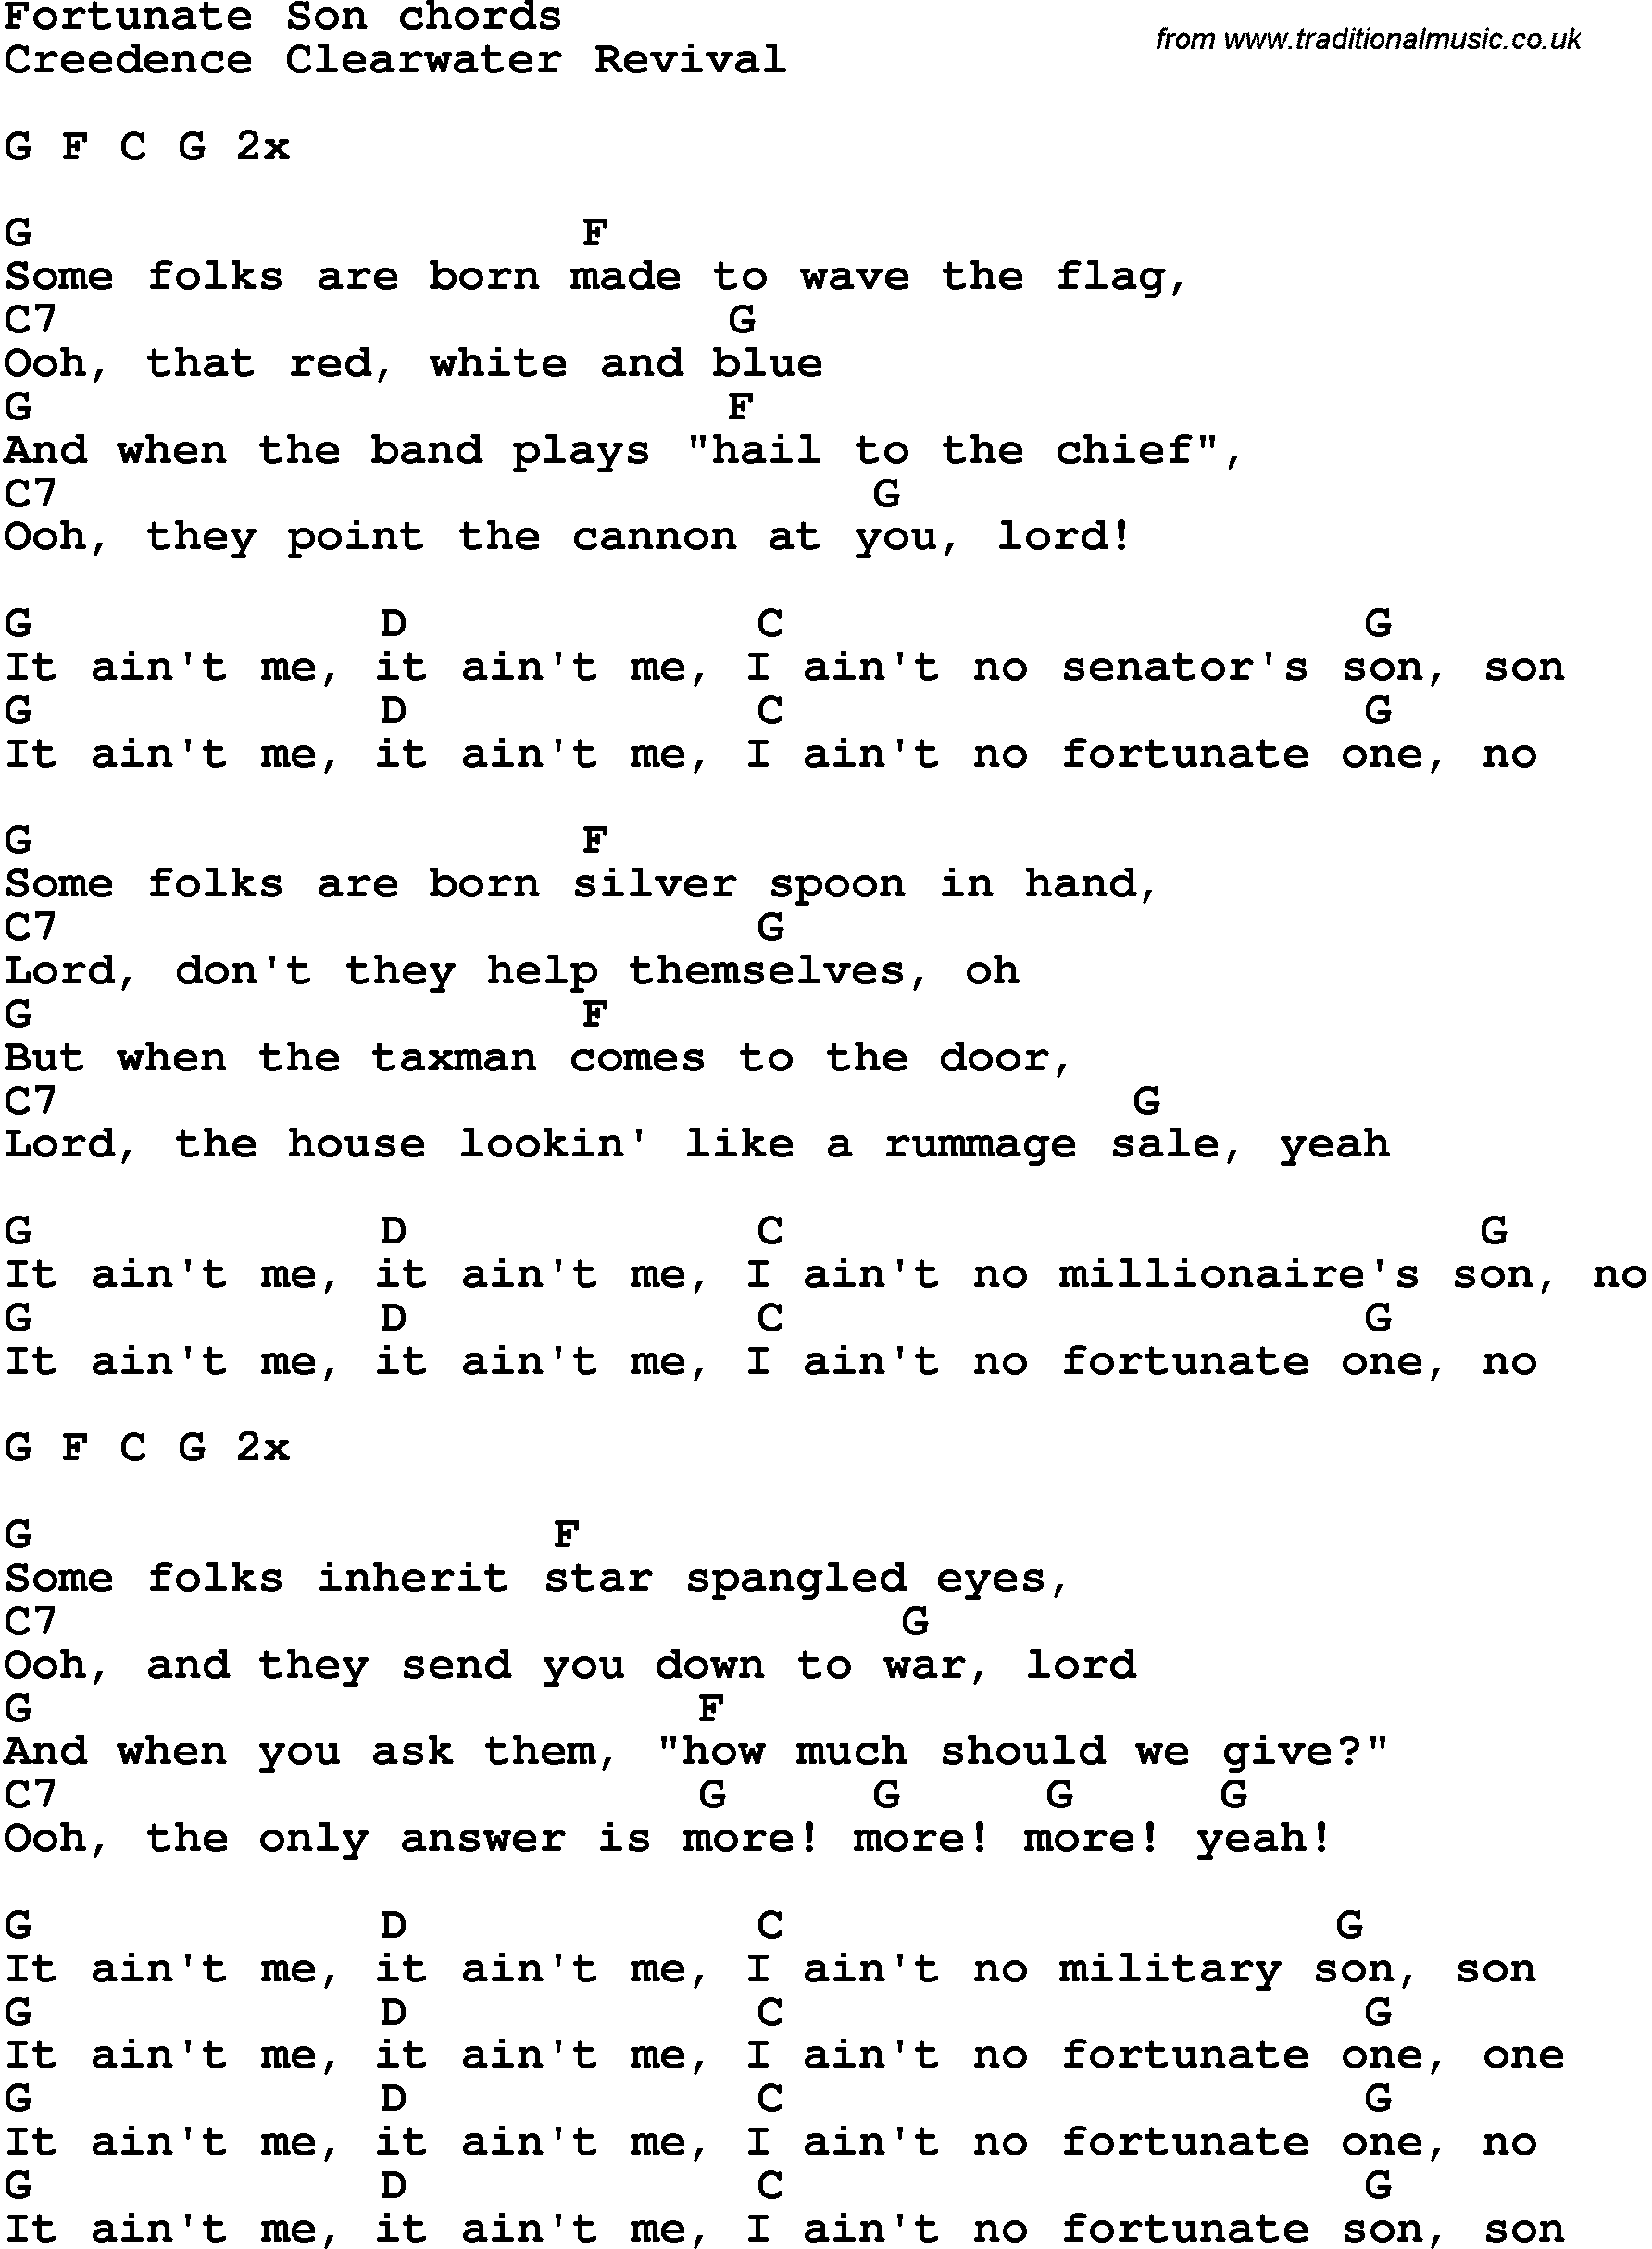 Song Lyrics with guitar chords for Fortunate Son